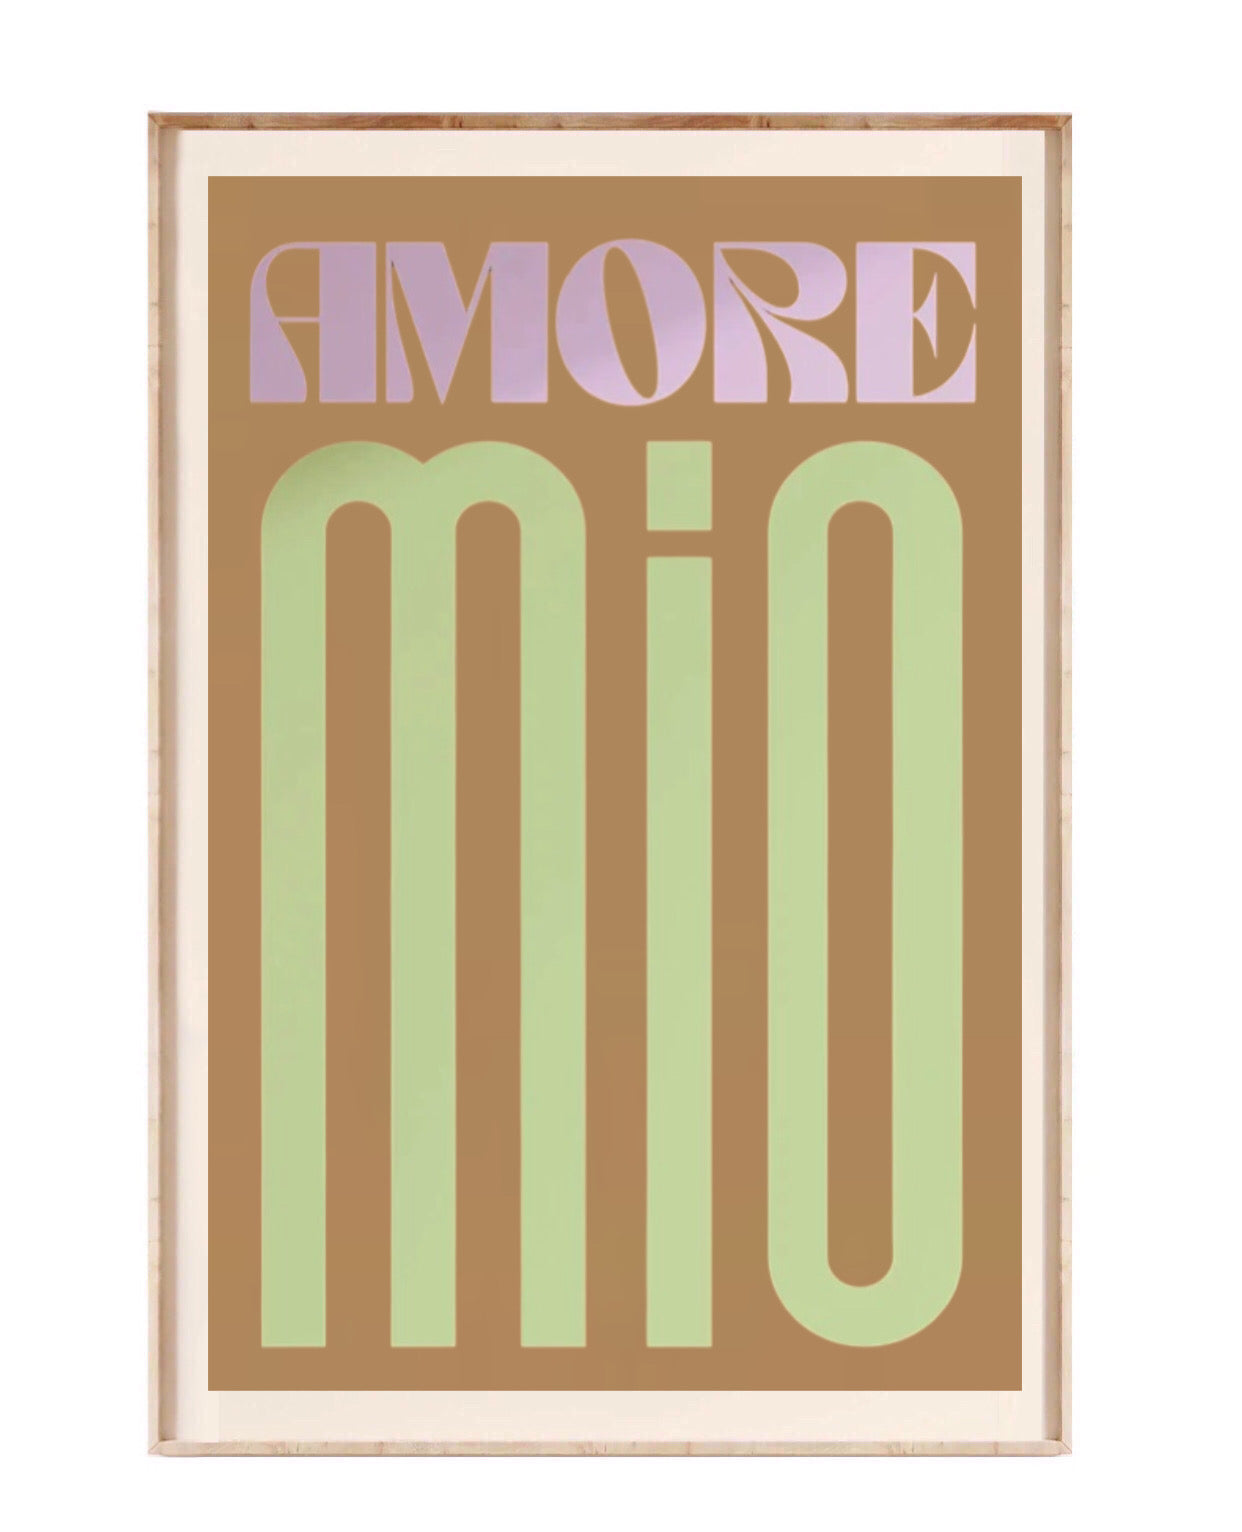 " amore mio " poster